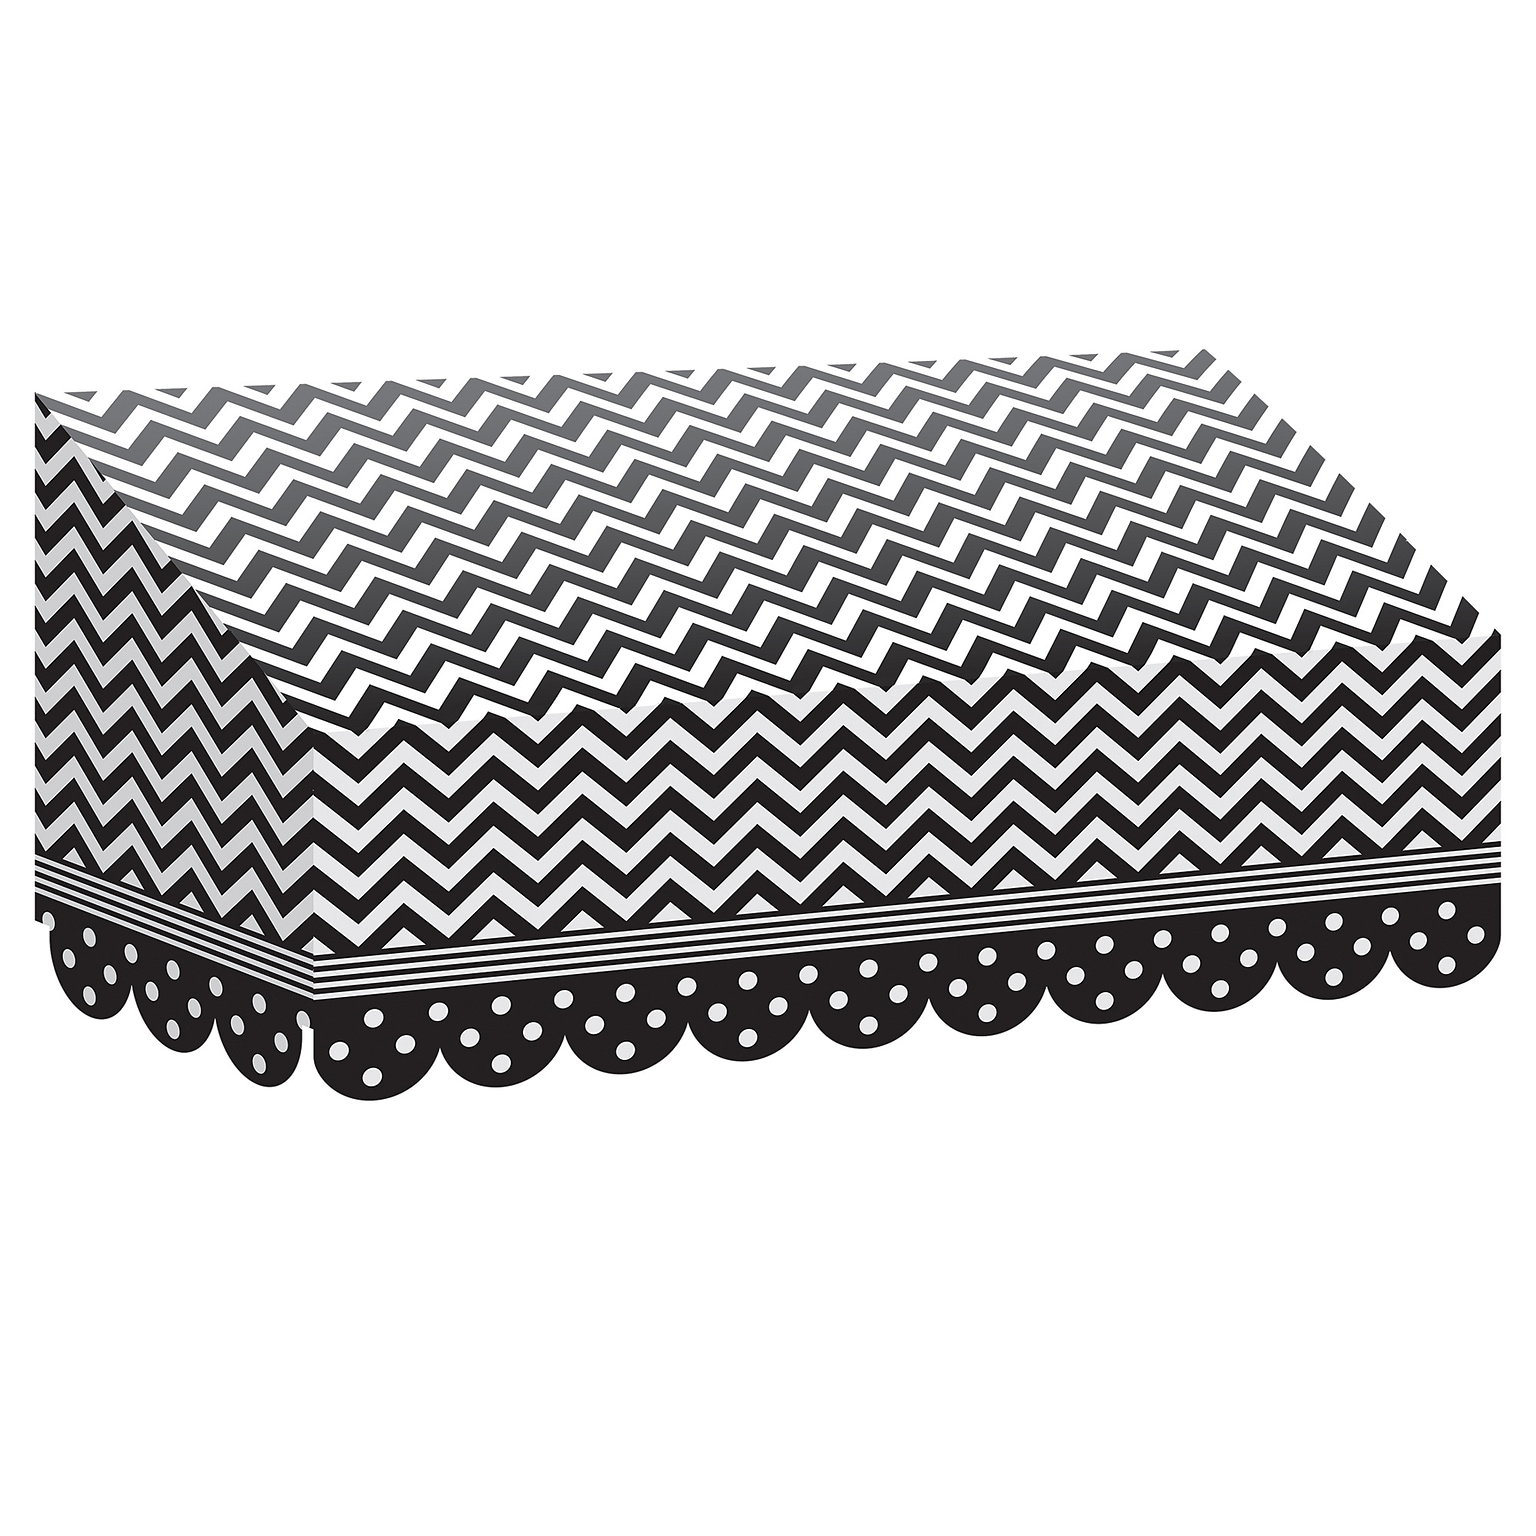 Teacher Created Resources Black & White Chevrons and Dots Awning (TCR77164)